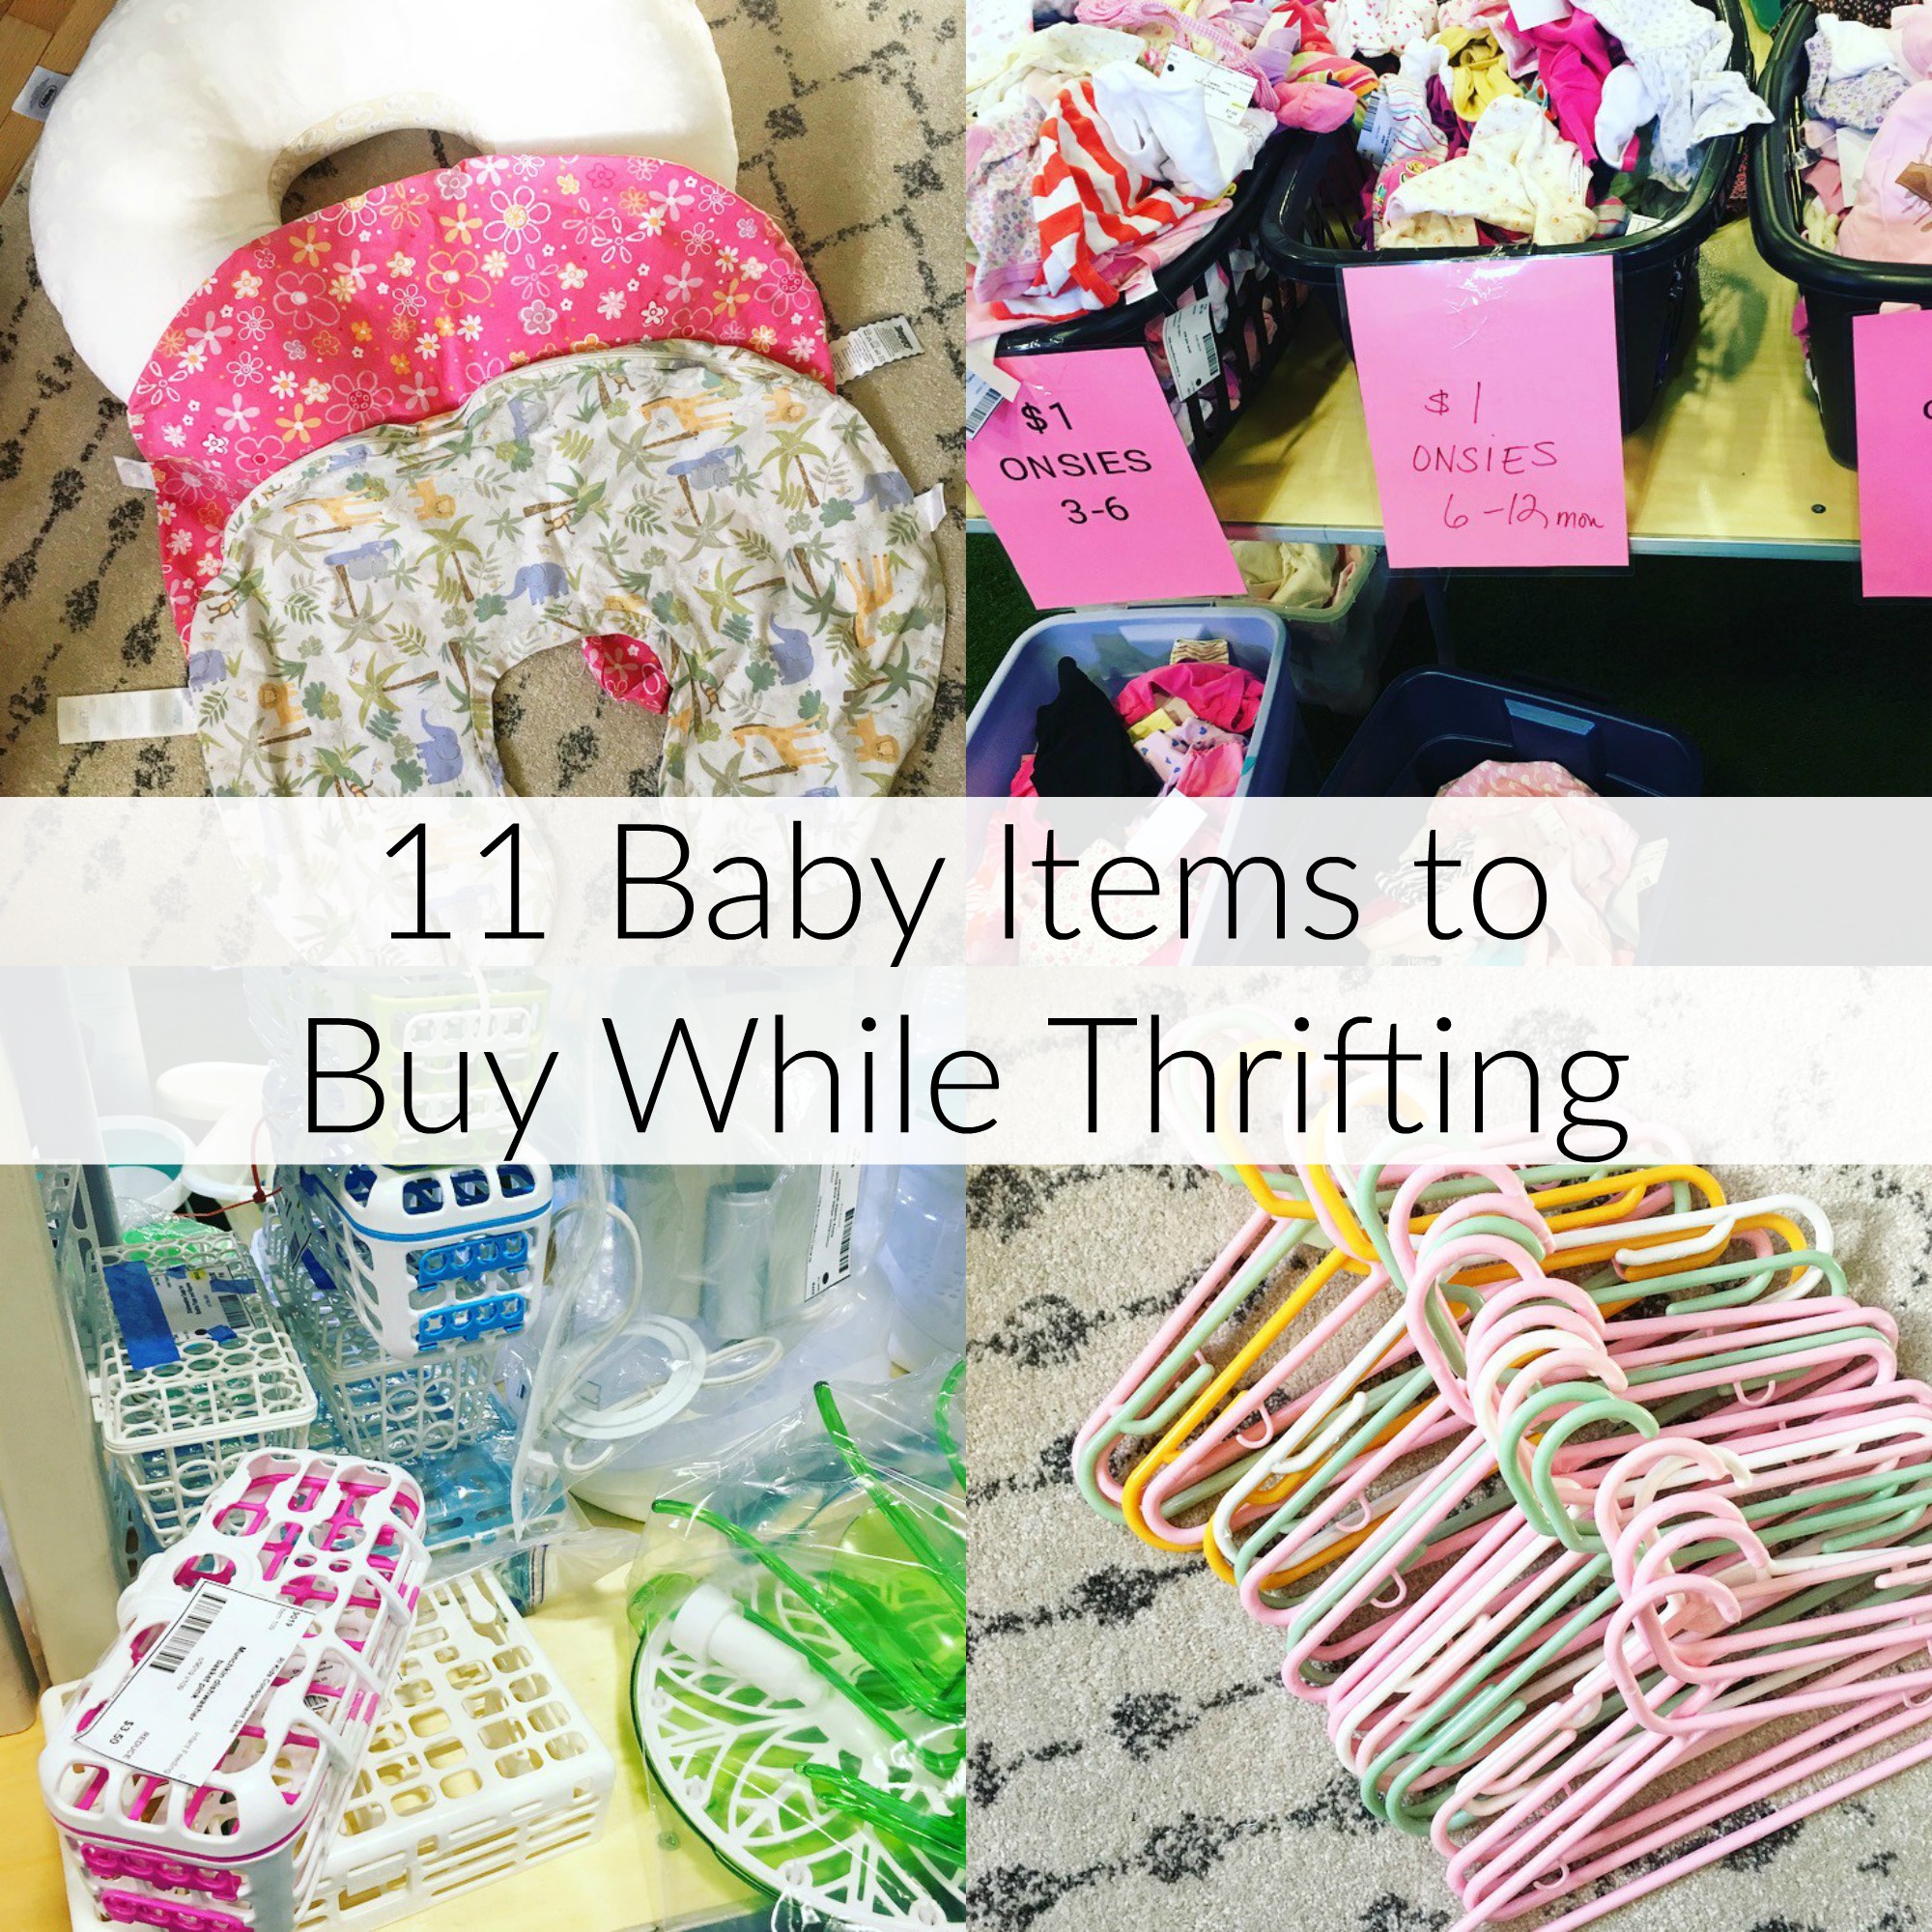 11 Baby Items to Buy While Thrifting